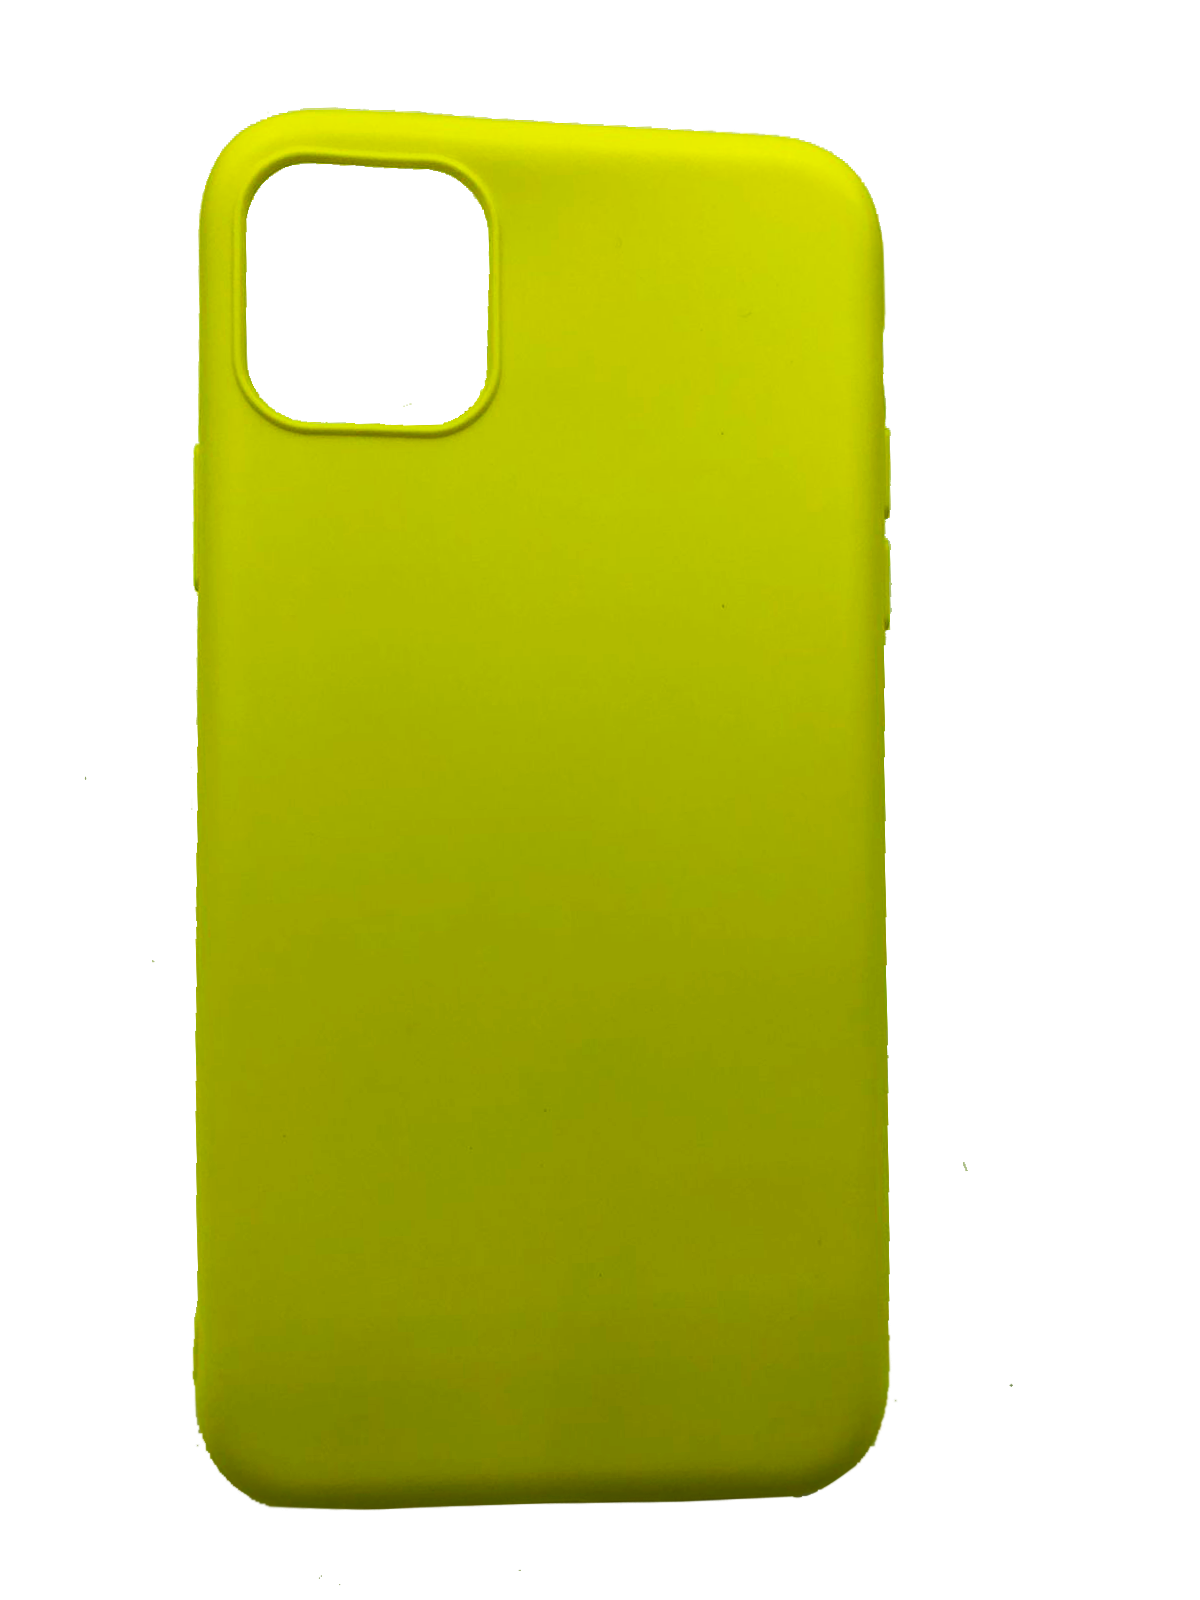 Silicone Case iPHONE 11 PRO MAX  YELLOW